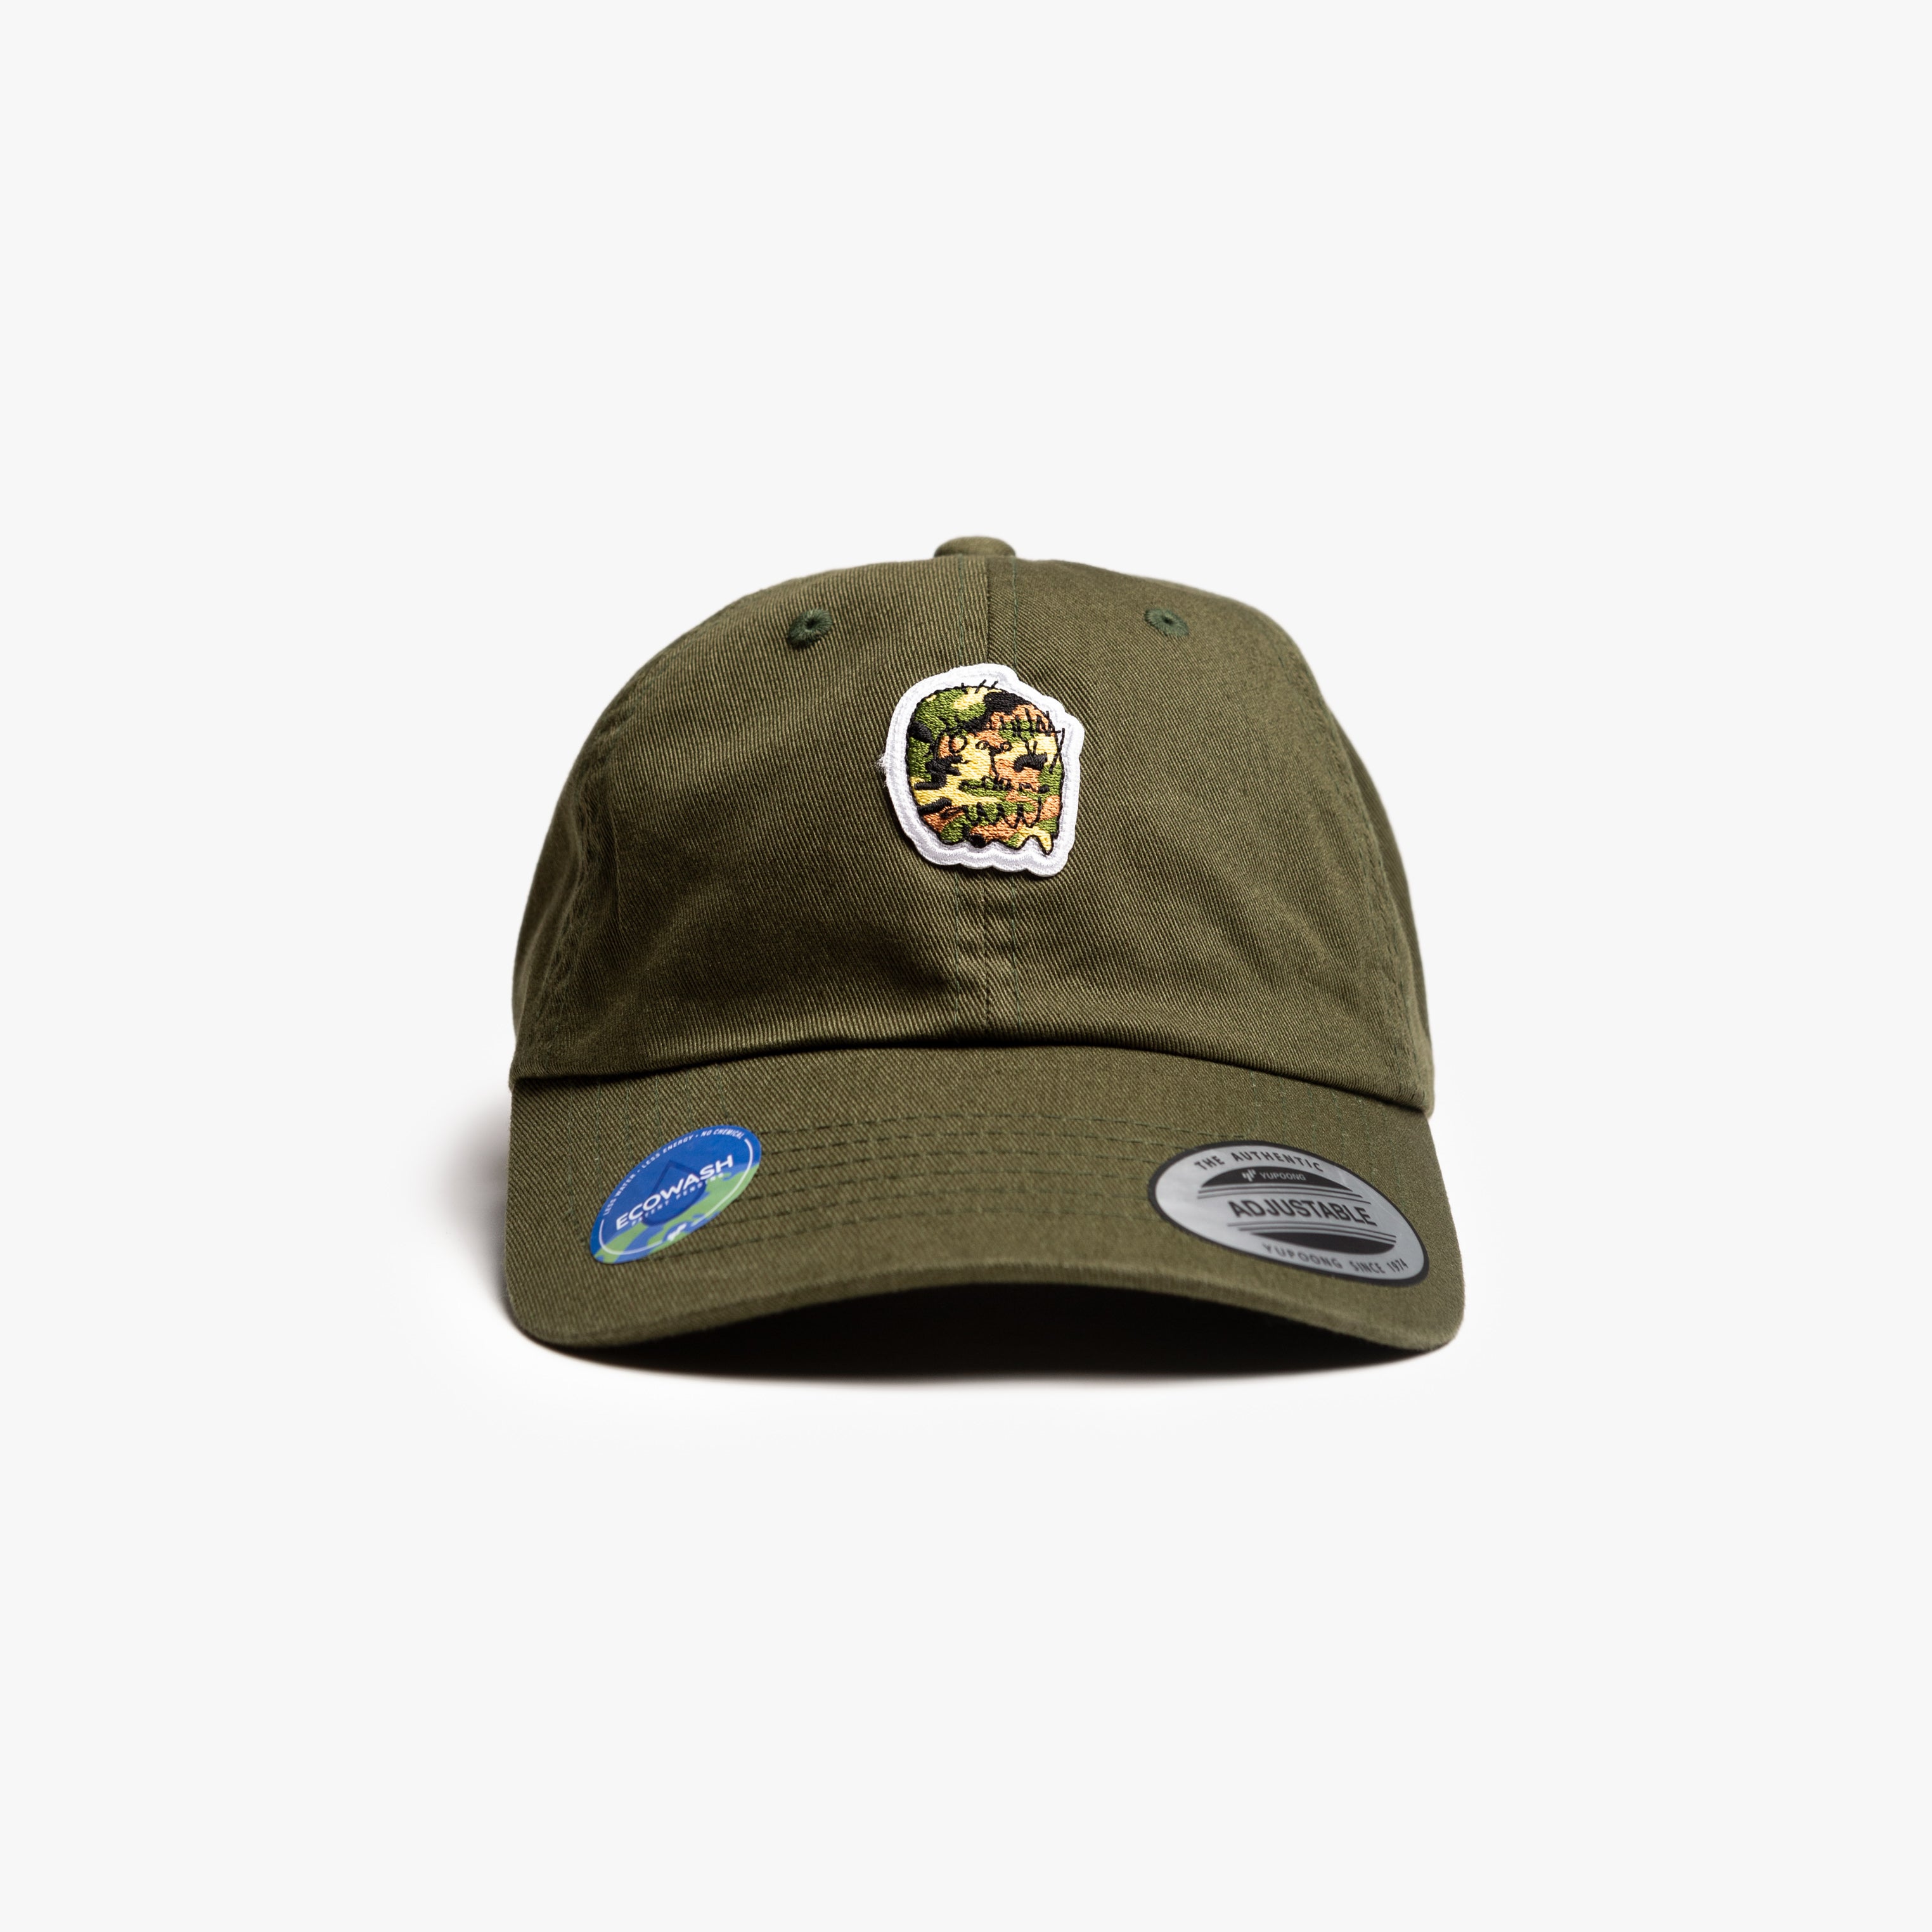 Russell Cap (Olive)